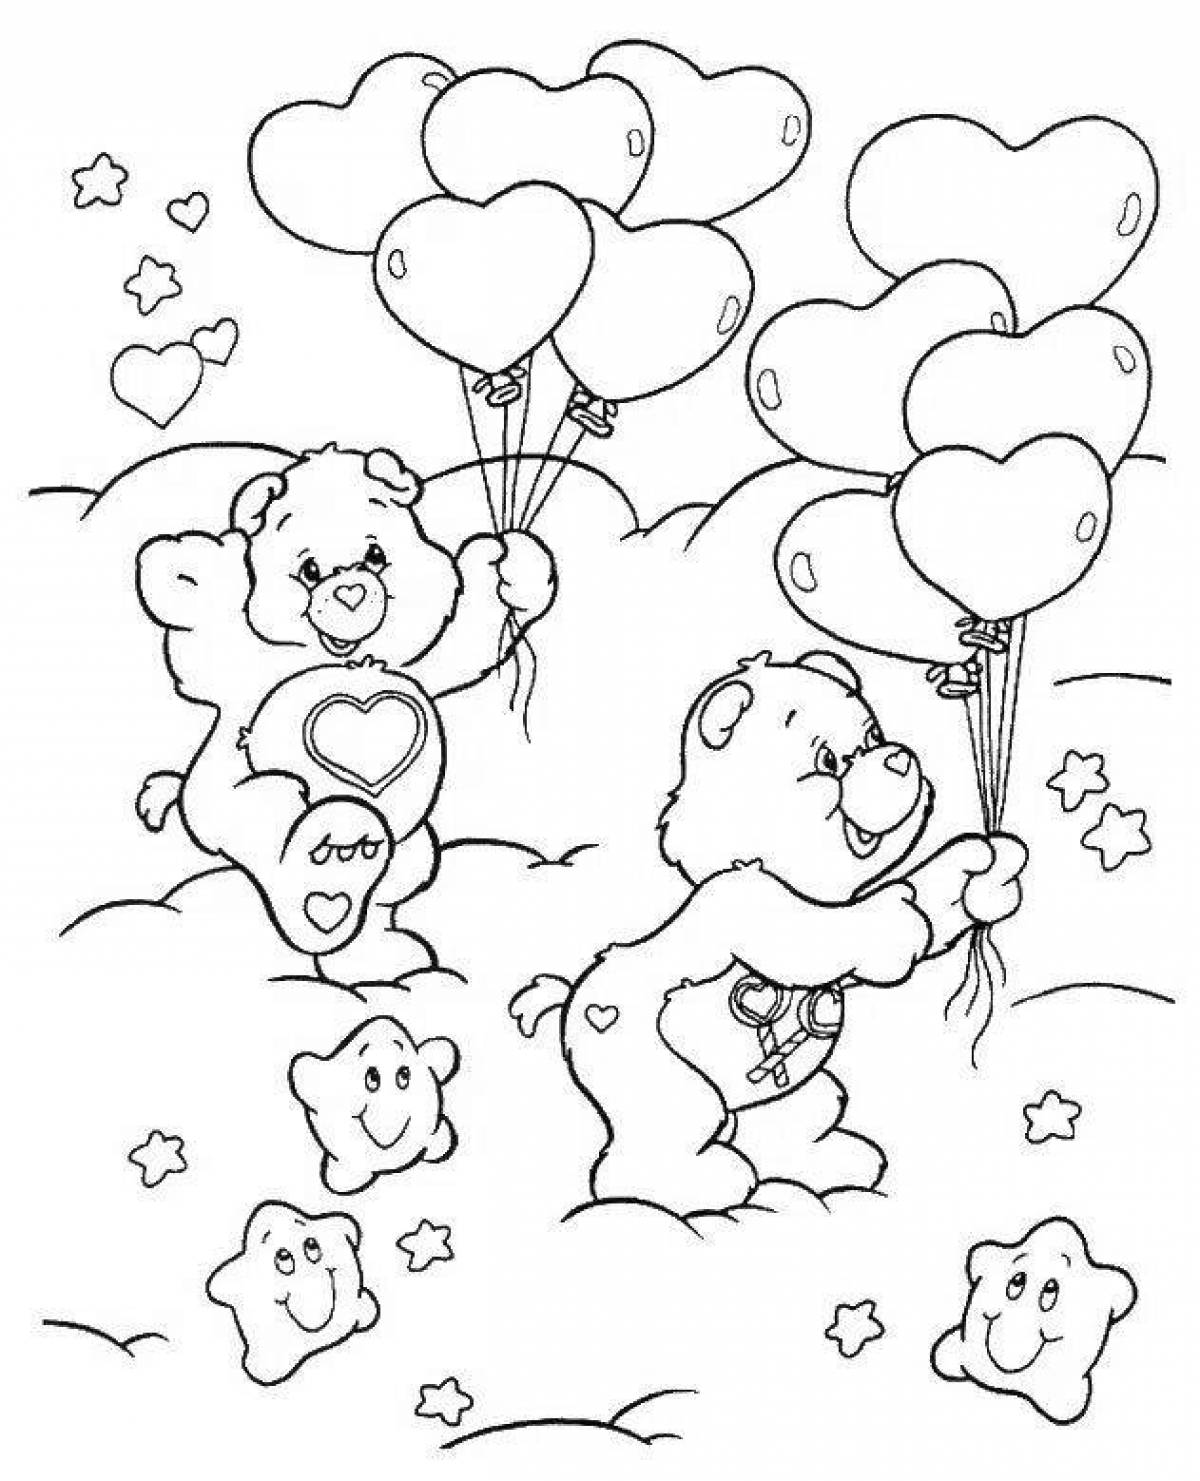 Furious bear with balloons